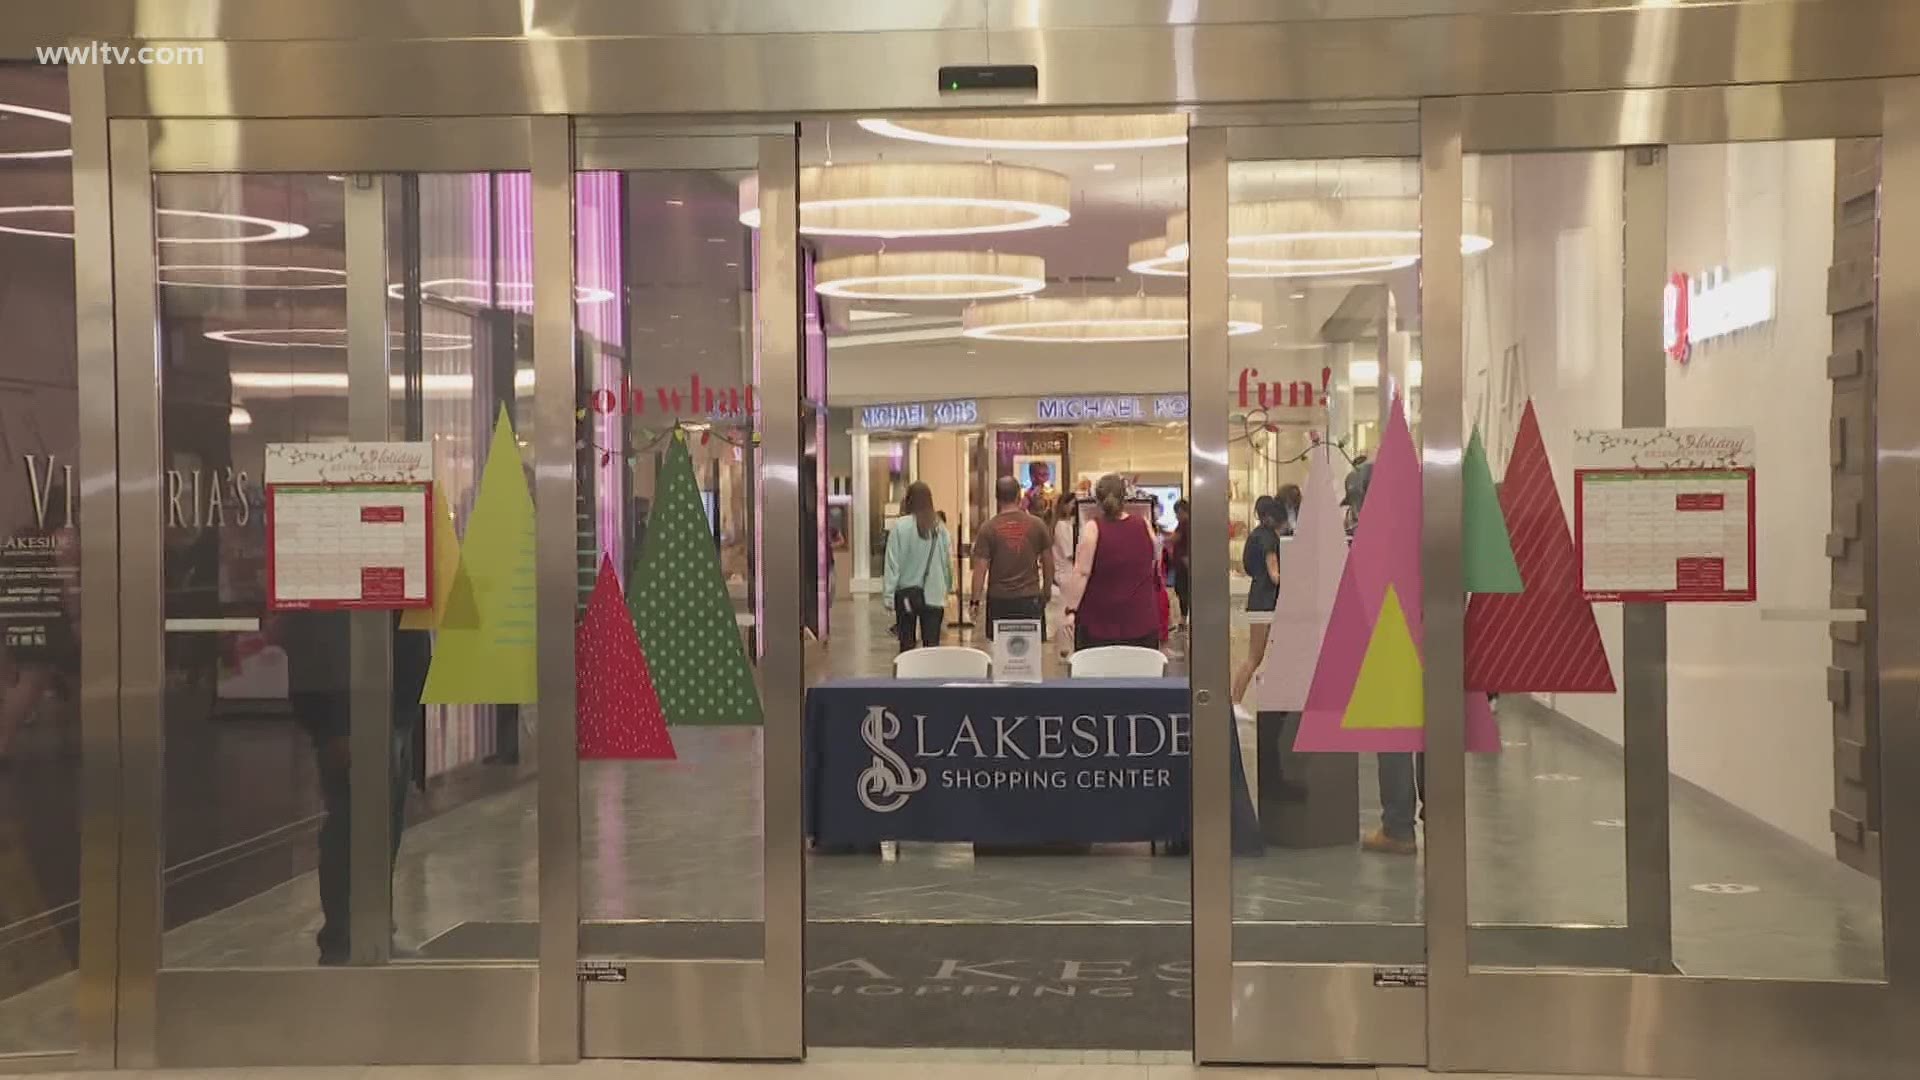 Lakeside Shopping Center implements new COVID restrictions for 2020 holiday season